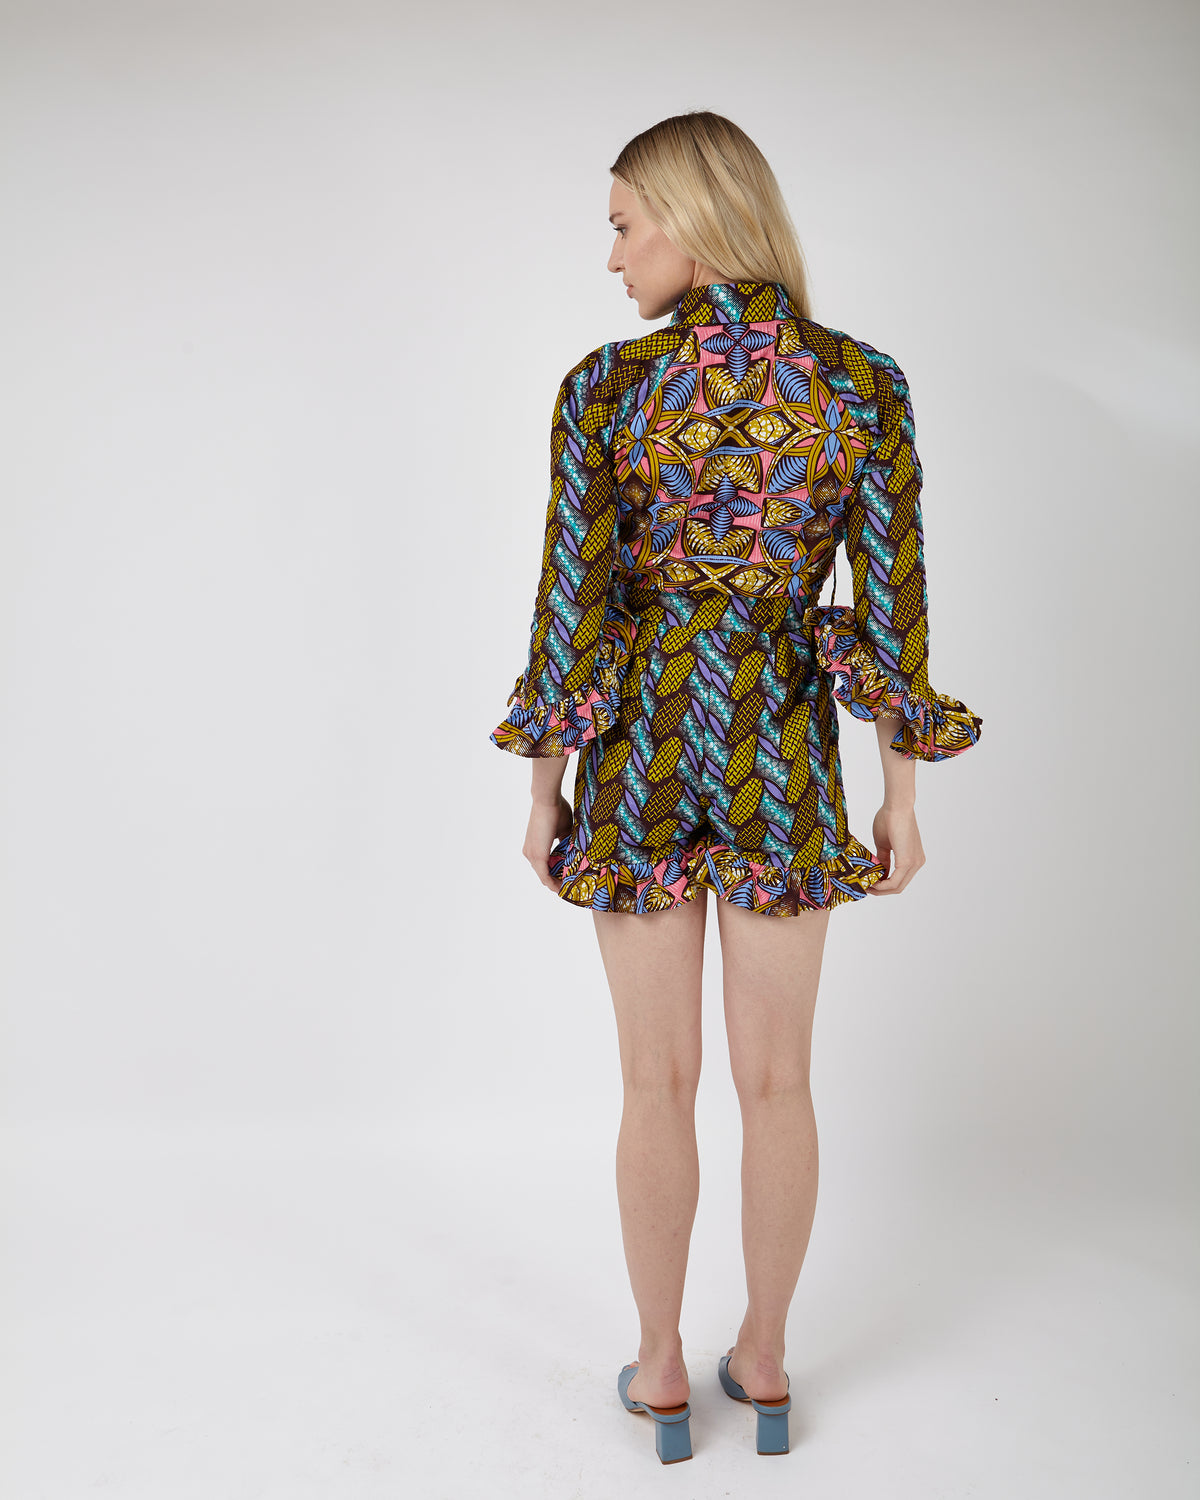 African Print clash Playsuit-Kelly - OHEMA OHENE AFRICAN INSPIRED FASHION